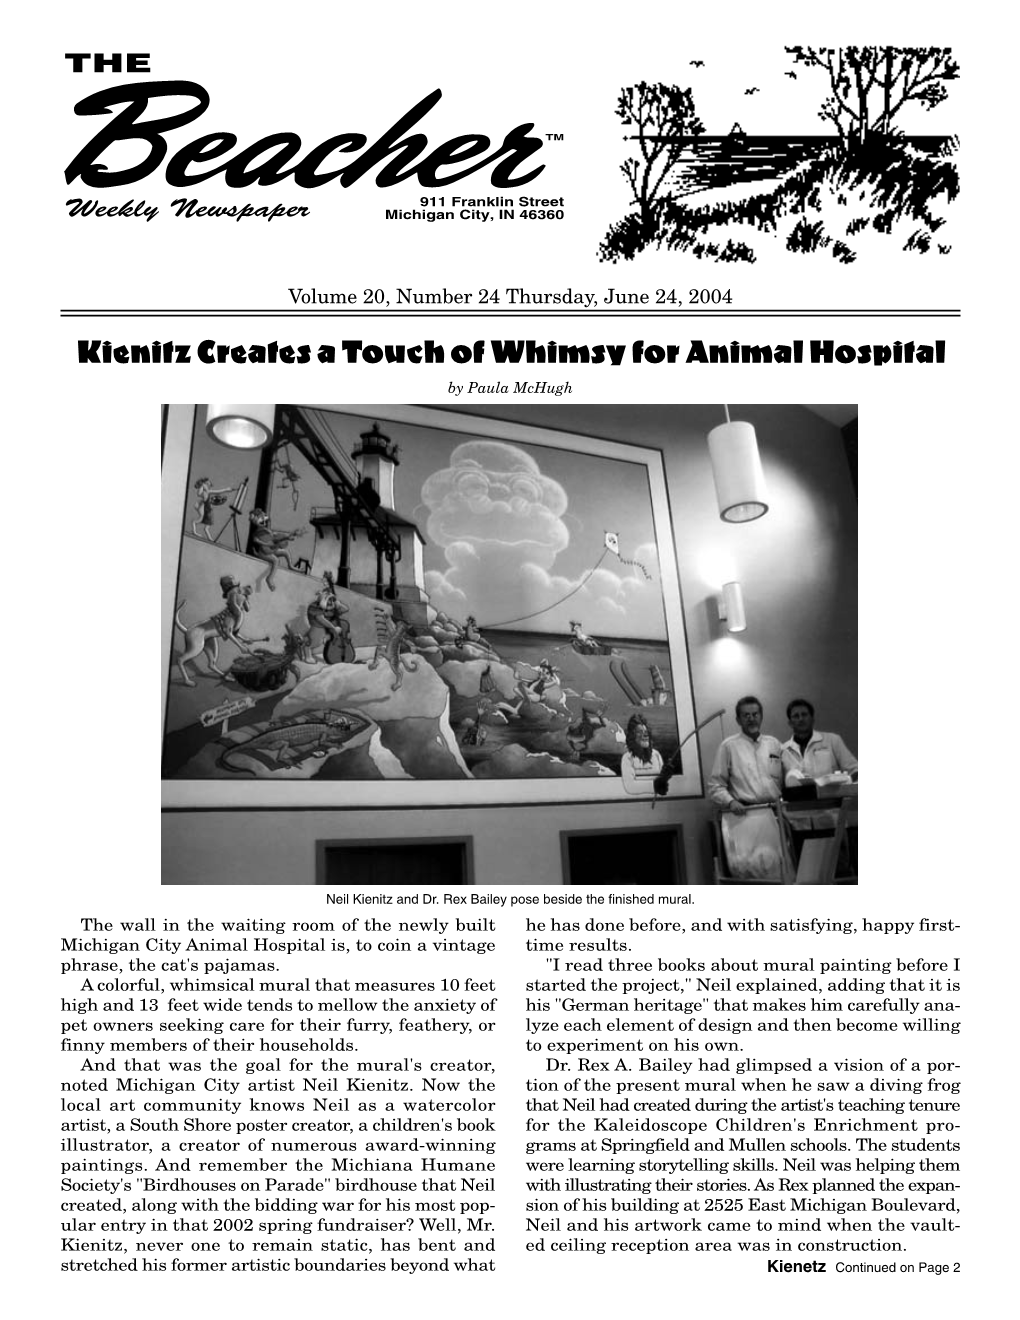 Kienitz Creates a Touch of Whimsy for Animal Hospital